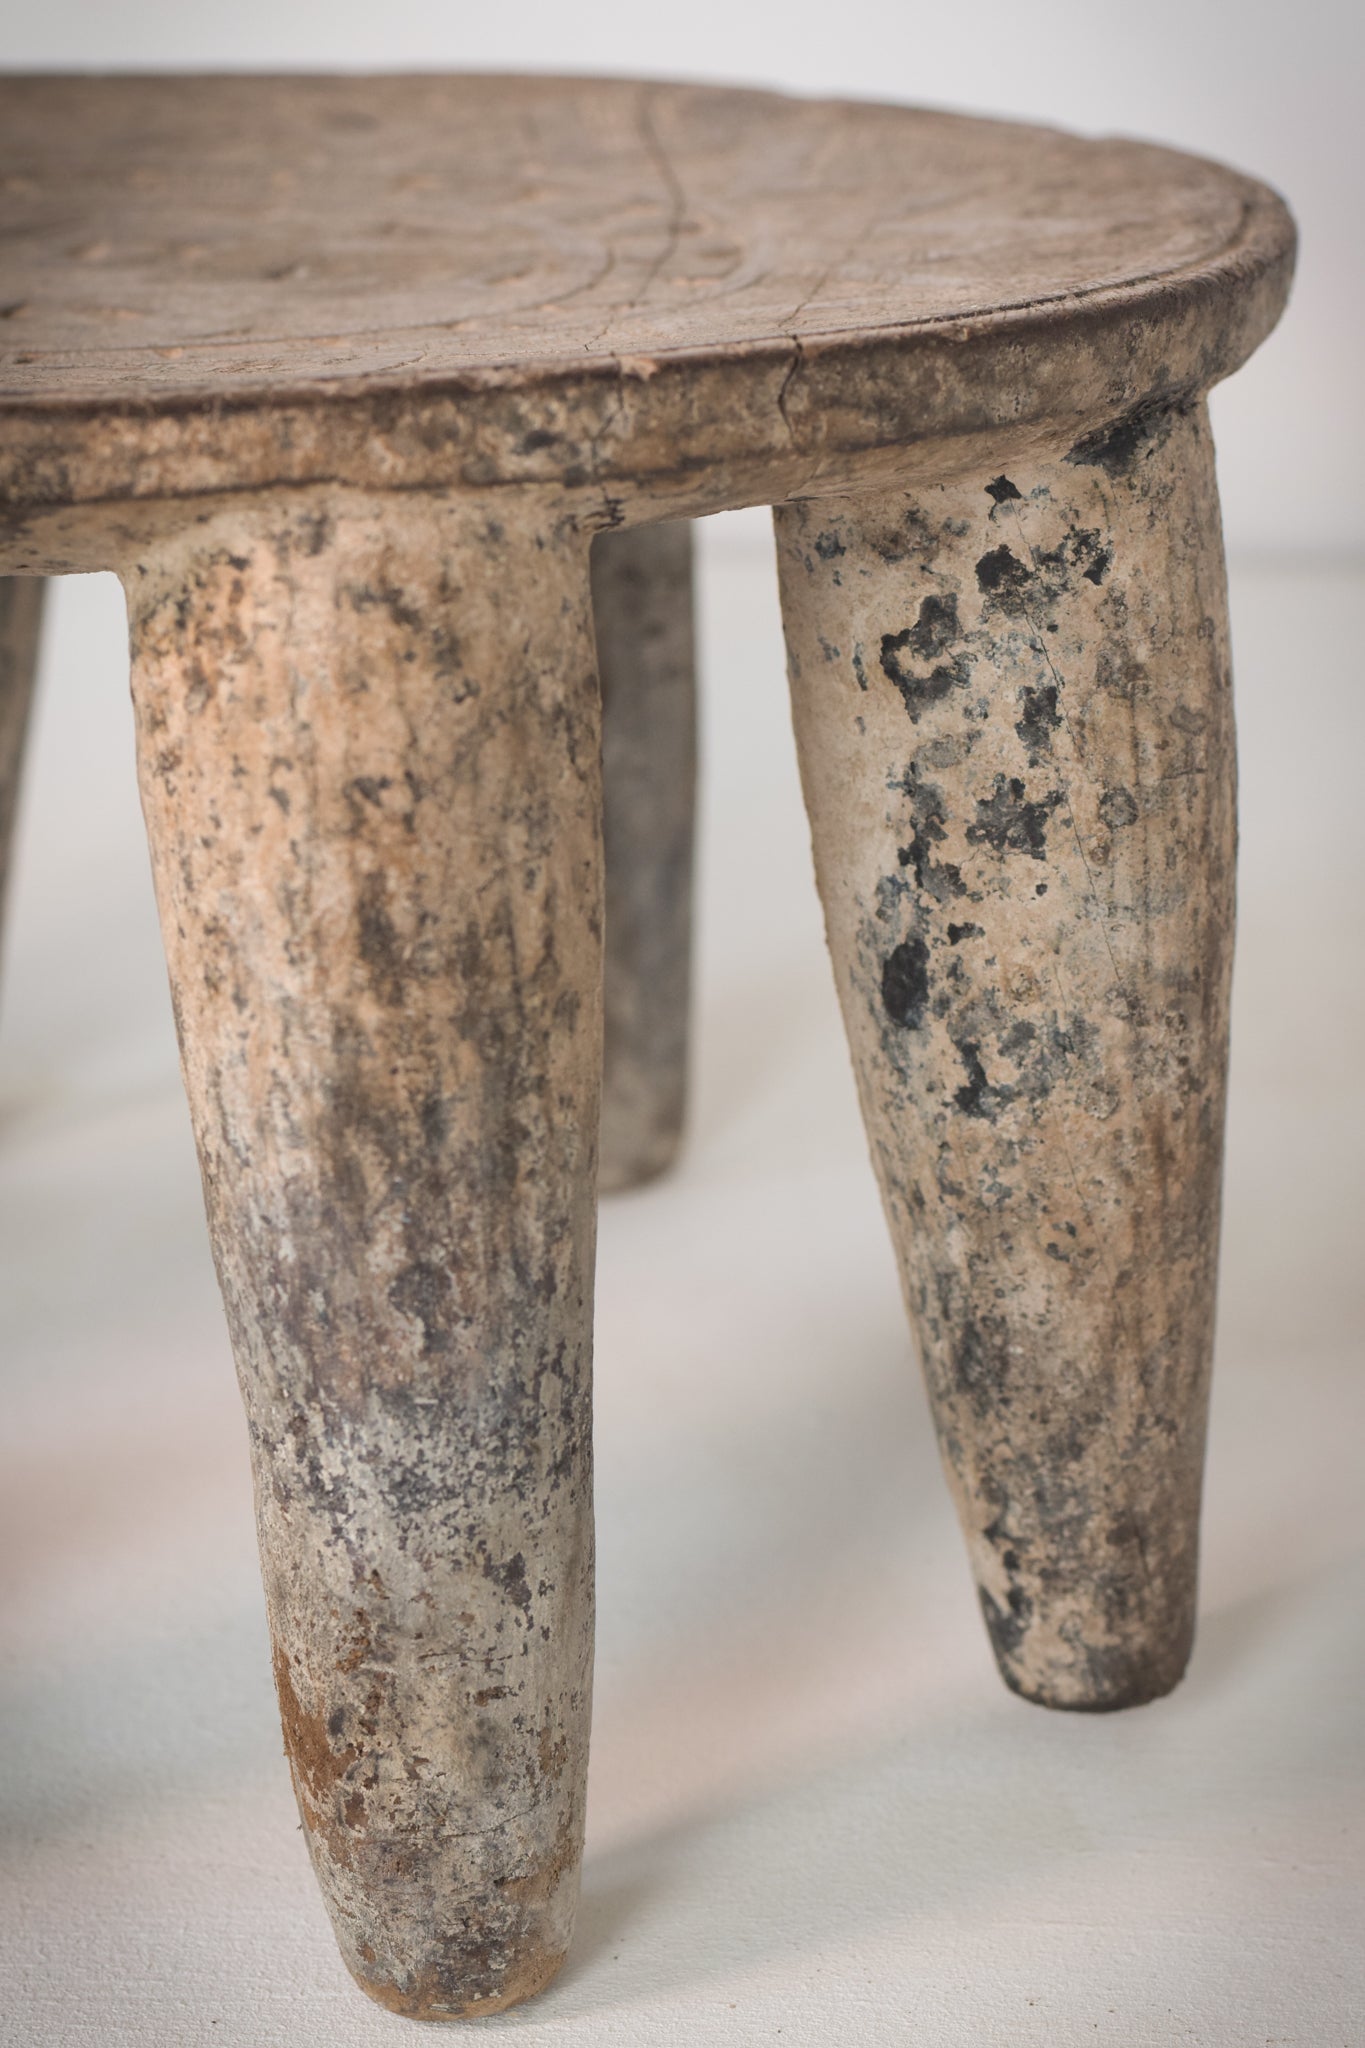 African Tribal Stool